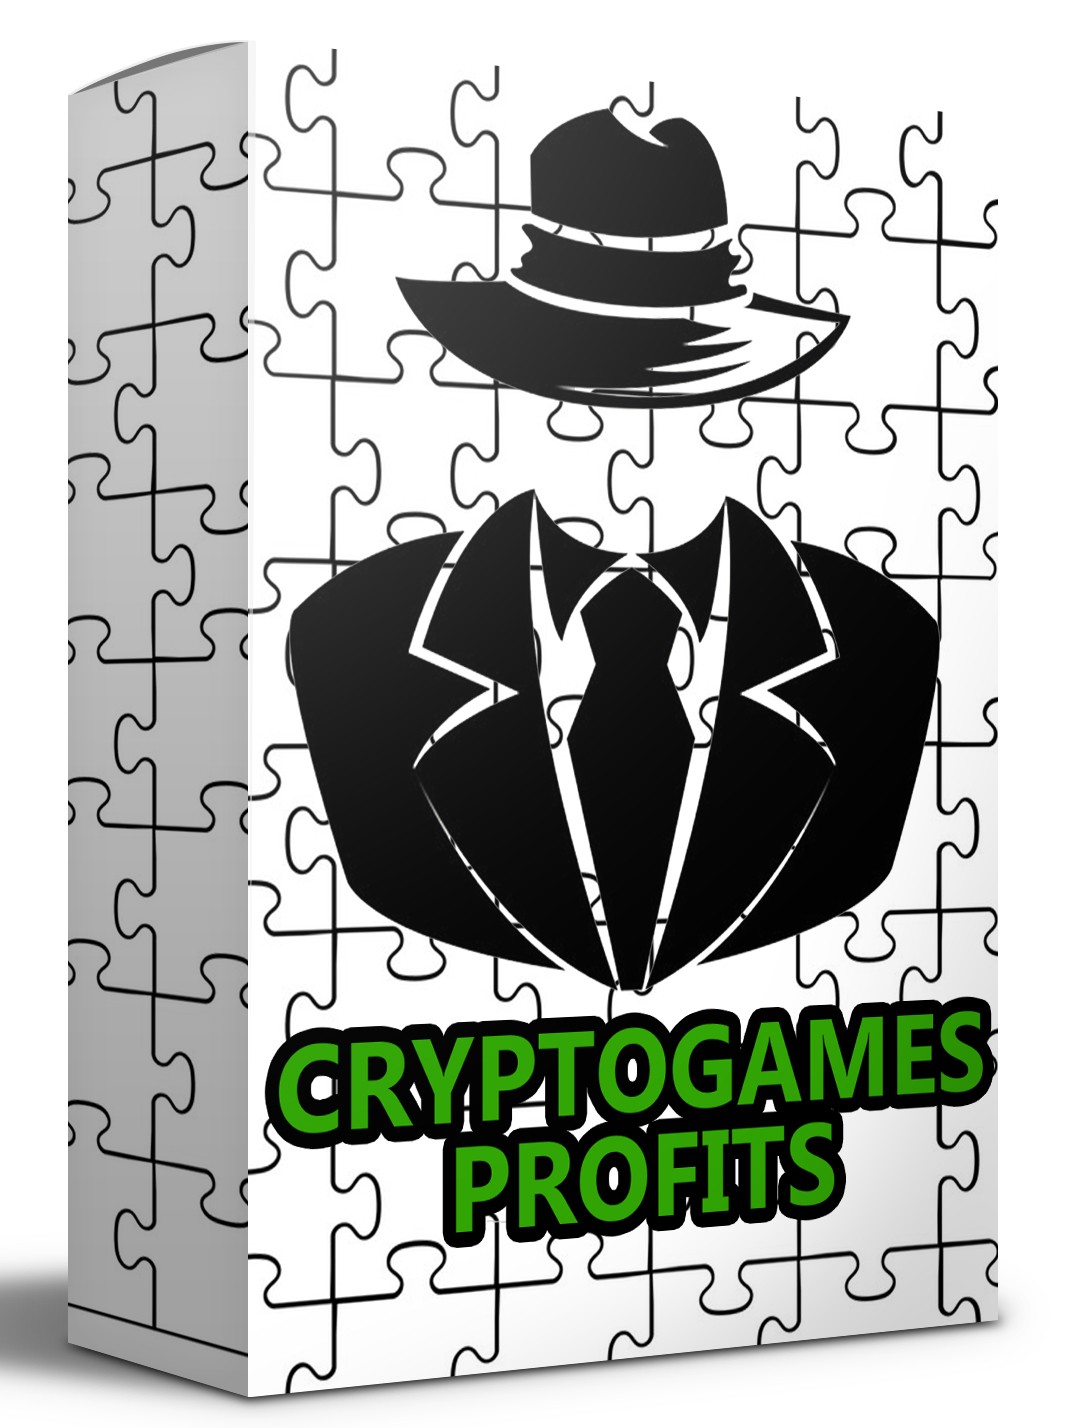 Cryptogames Profits With 2020 Low Content Deal: Let profit in 2021 with most undercover puzzle books on Amazon with huge new year bonus bundle, save 4985$ on whole package